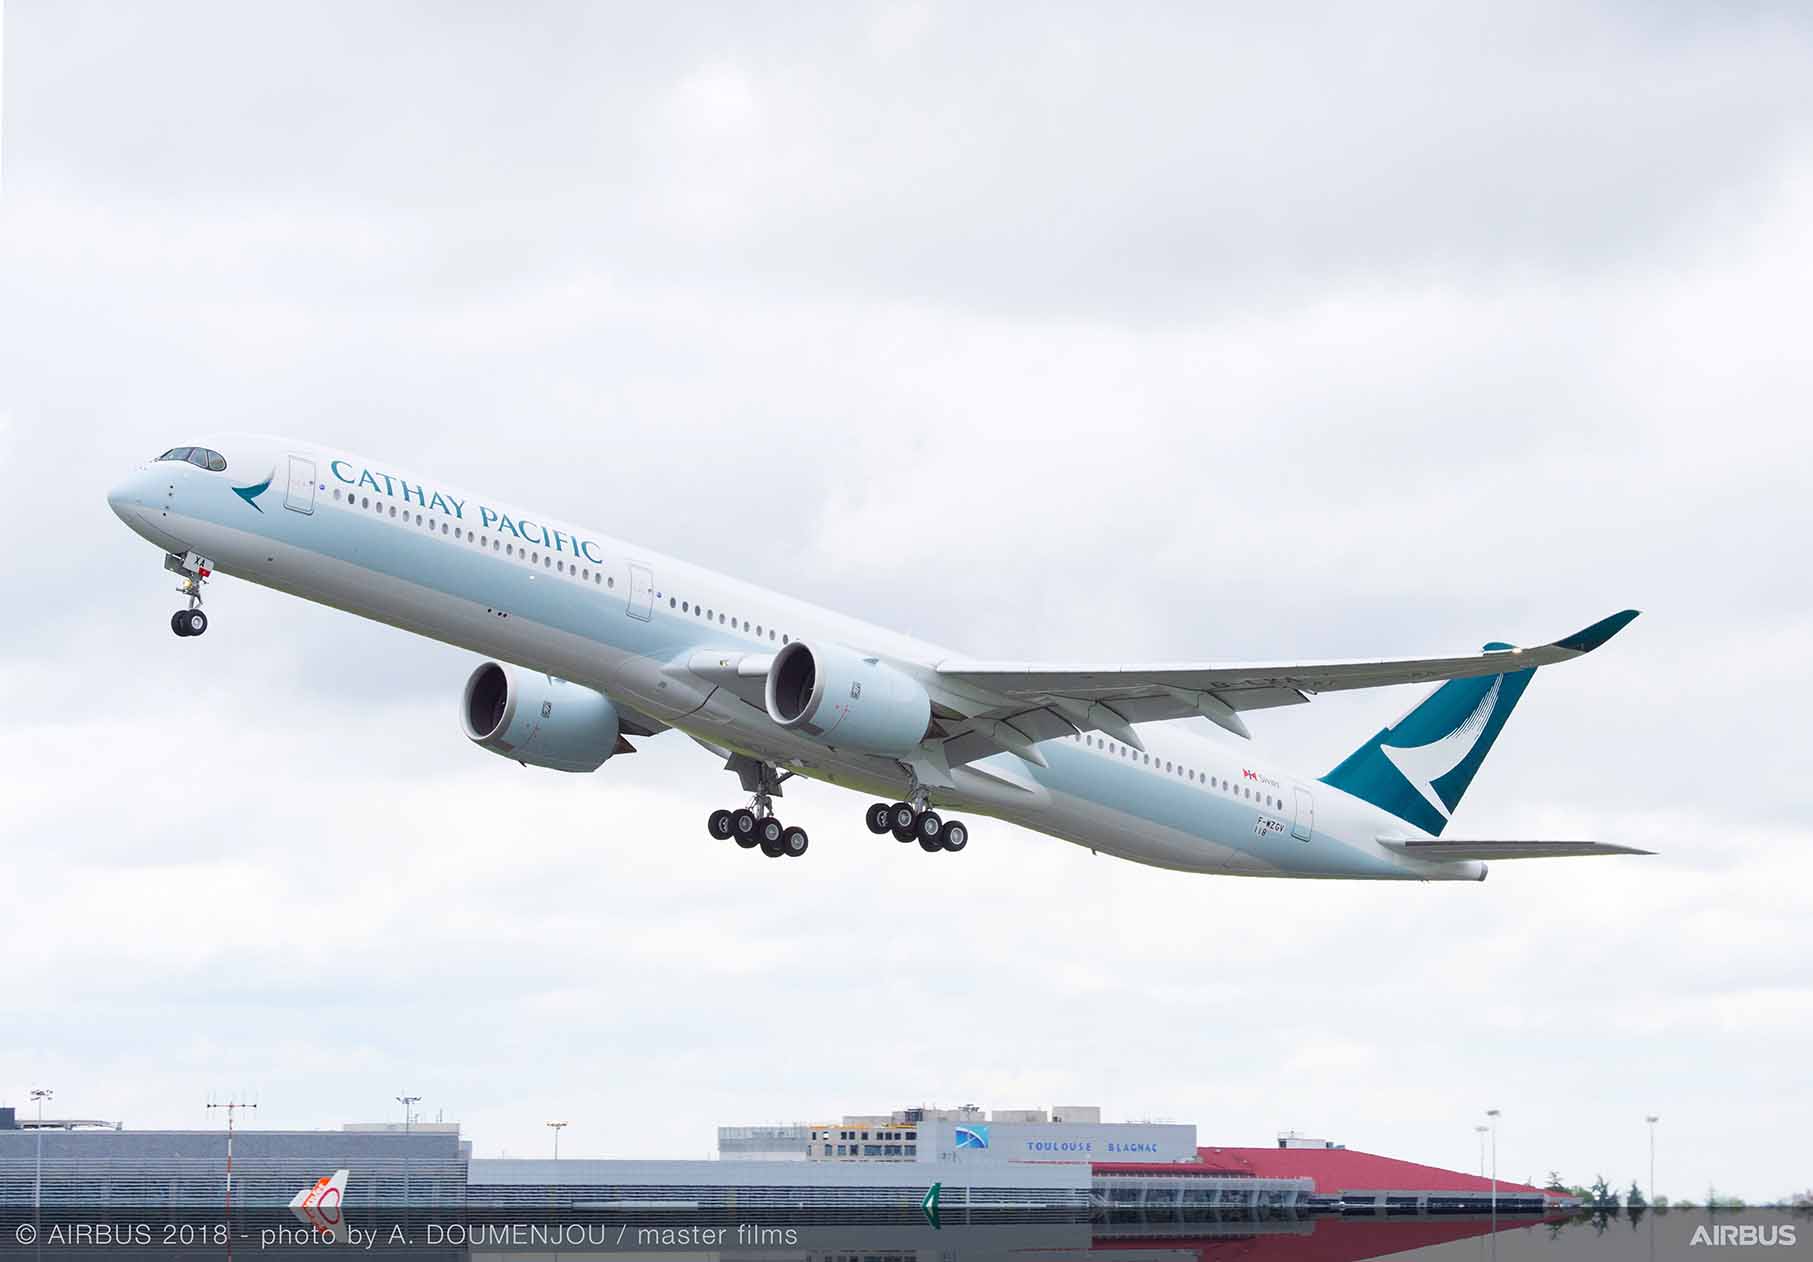 Cathay Pacific warns that Hong Kong protests could harm August revenues